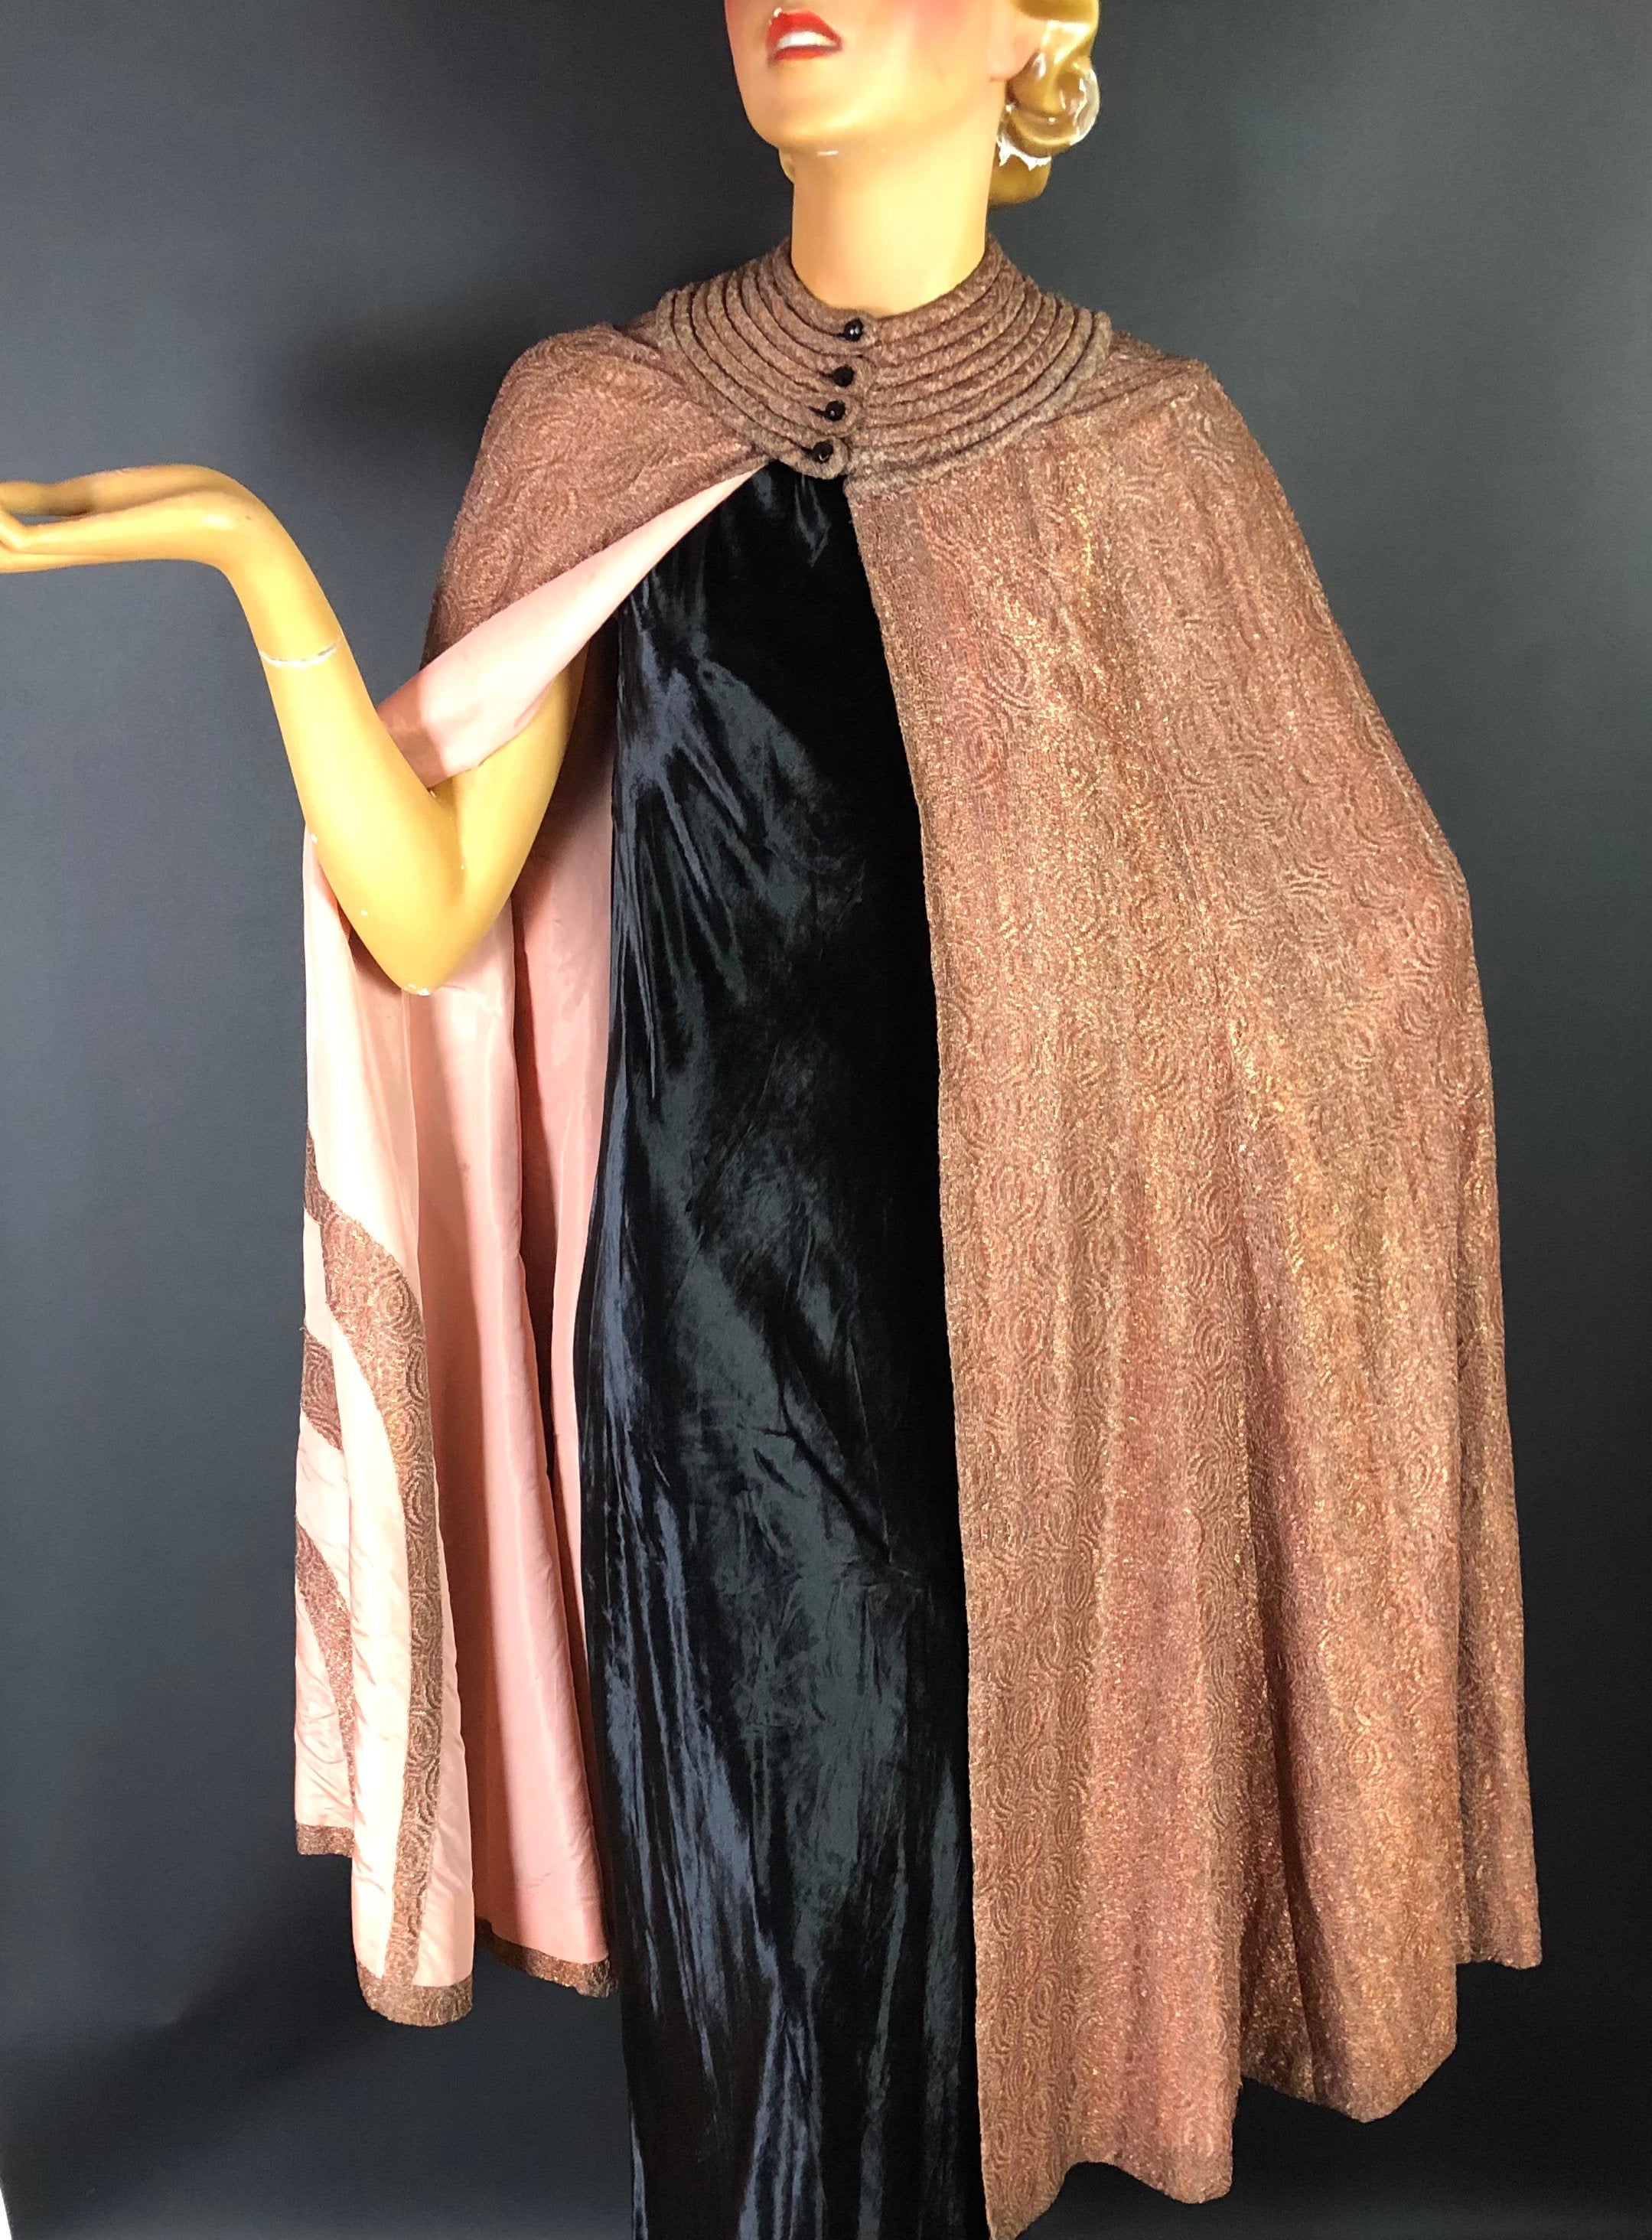 RESERVED 1930s Copper Lamé Cape by Madame Isobel, Midi Length, Modernist Details, Peach Taffeta Lining with Art Deco Details, Glass Buttons